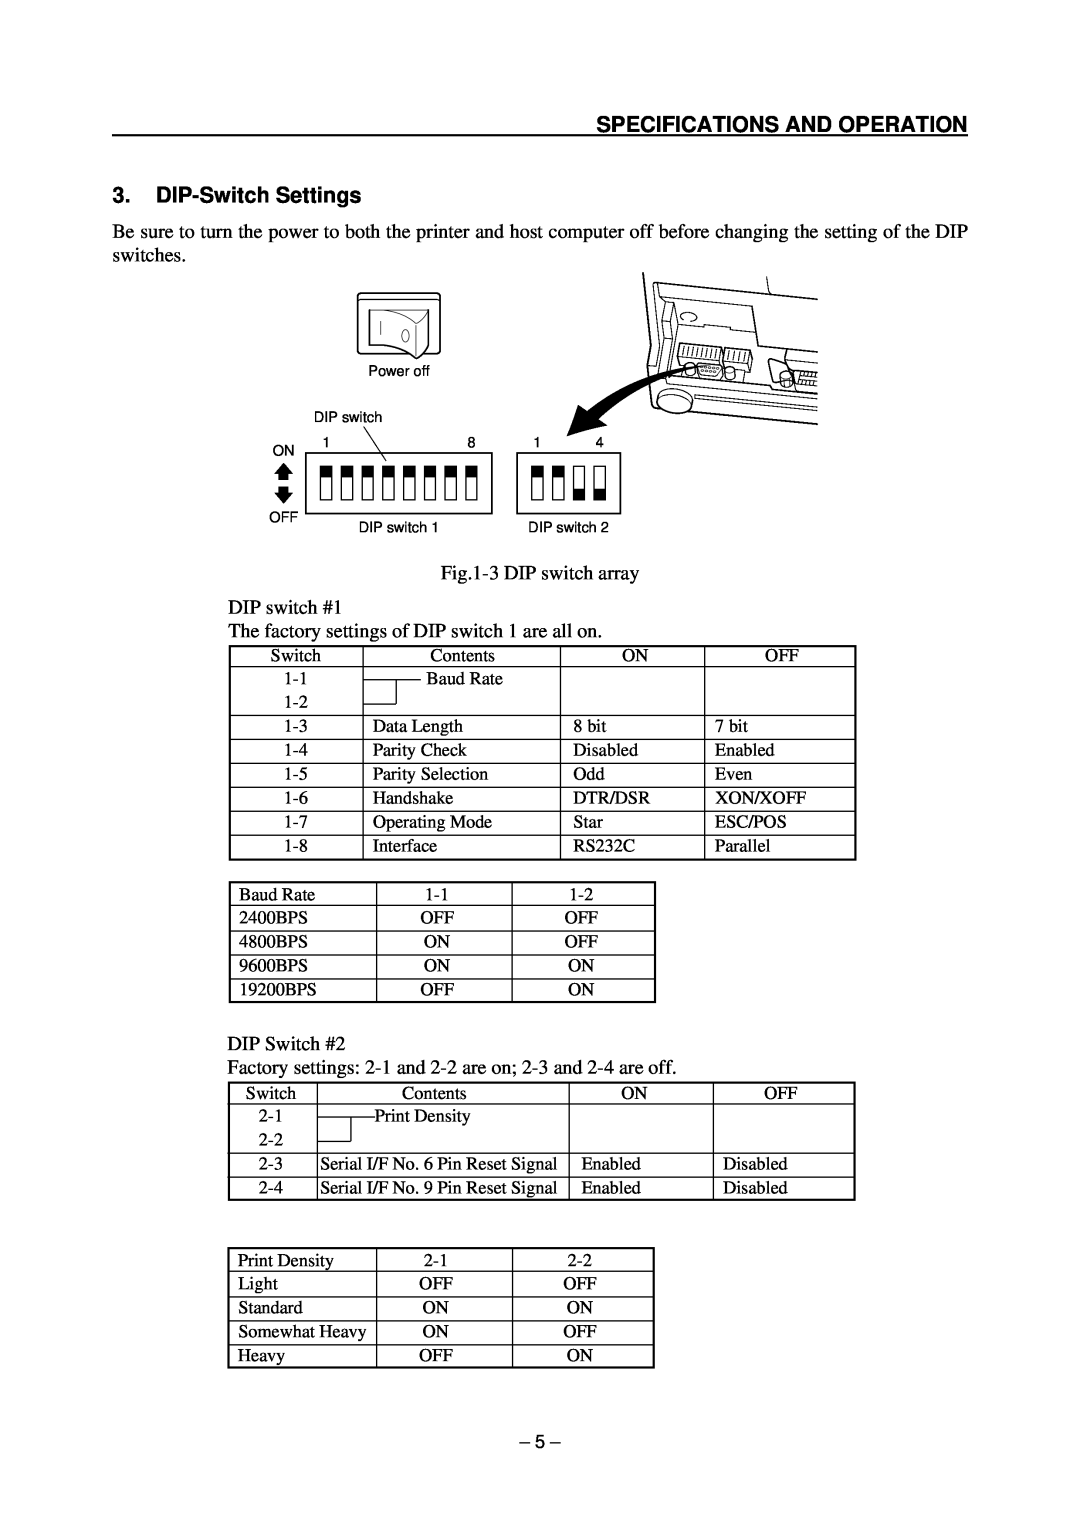 Star Micronics TSP200 technical manual SPECIFICATIONS AND OPERATION 3. DIP-Switch Settings, DIP switch #1, DIP Switch #2 